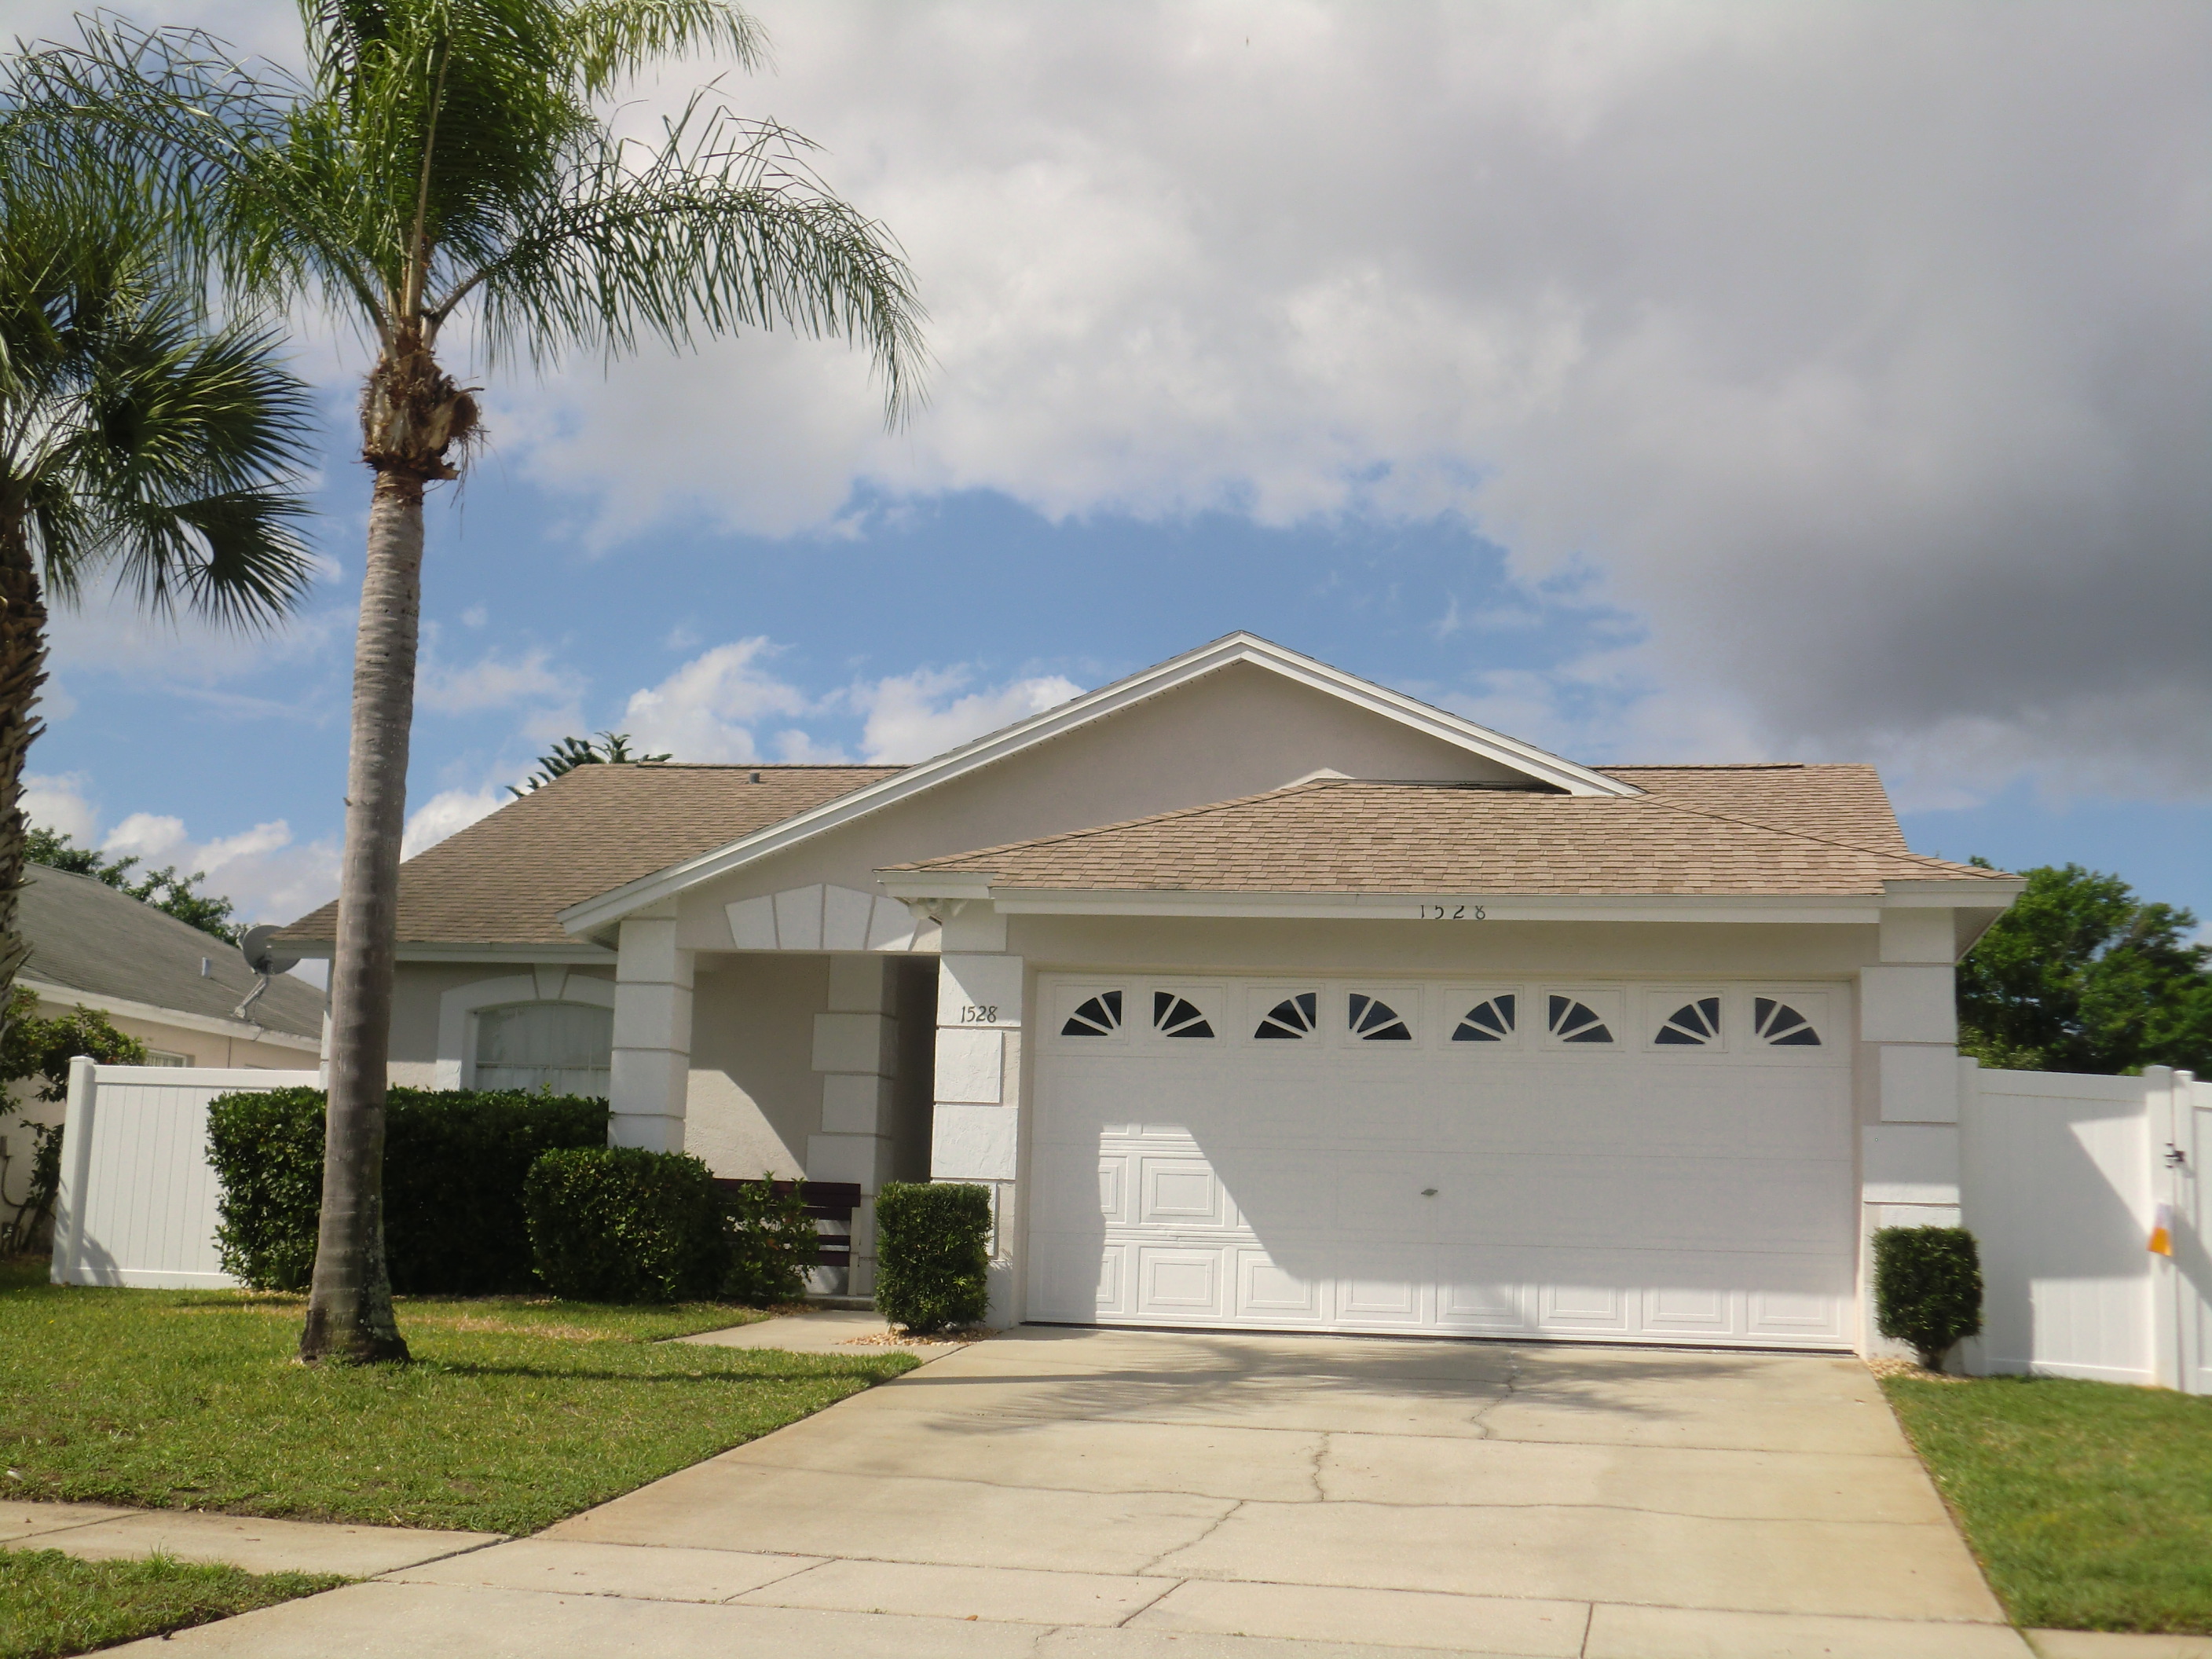 Orlando Fla. Family Vacation Home - Houses for Rent in Kissimmee